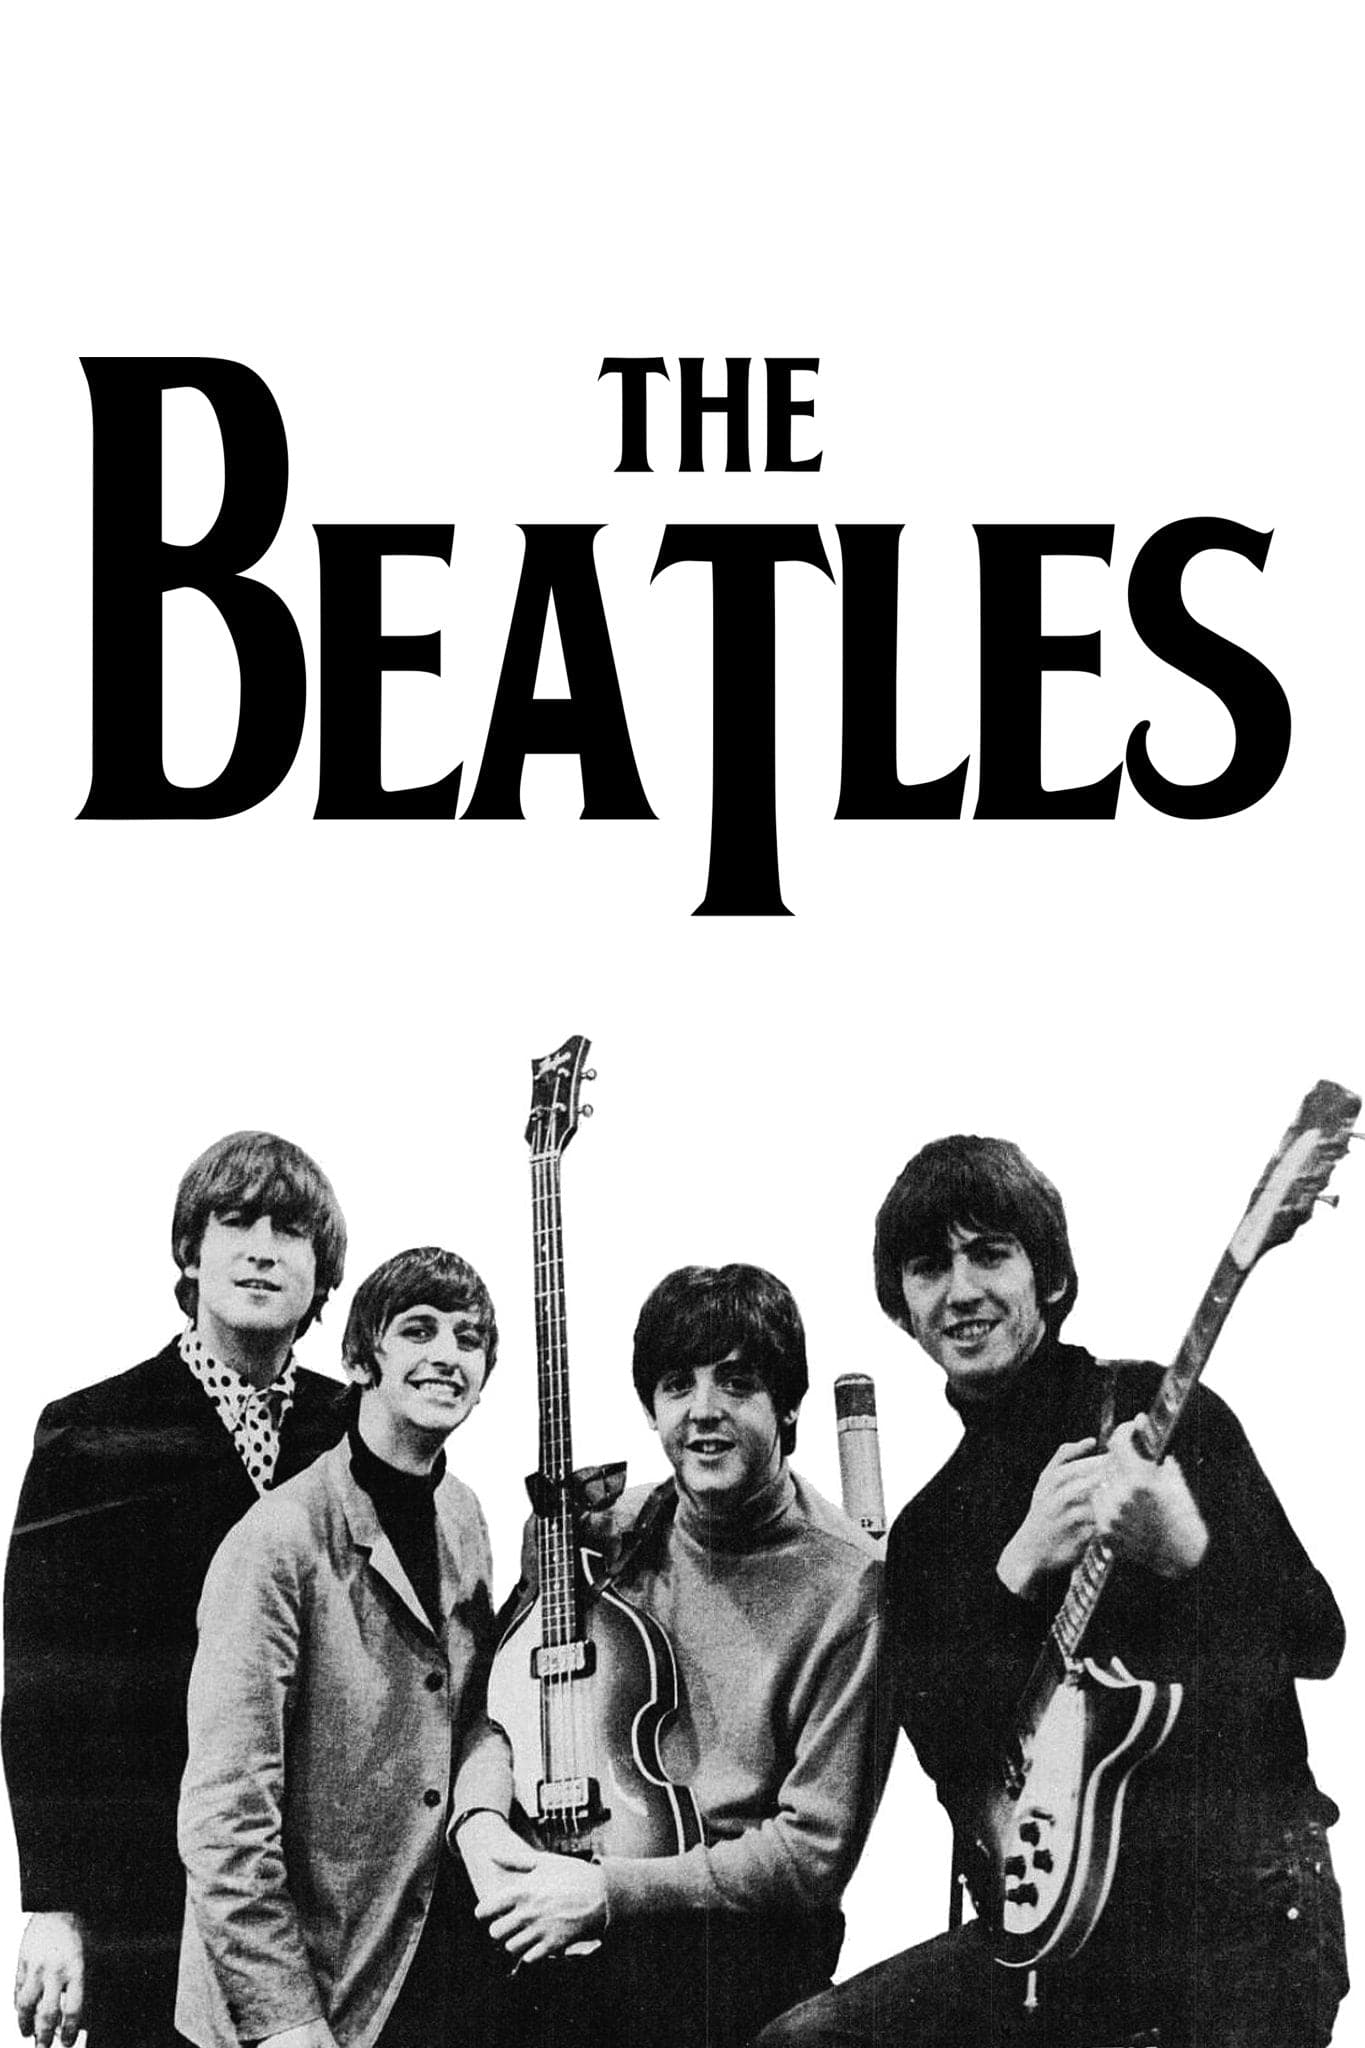 The Beatles 'Classic' Poster - Posters Plug